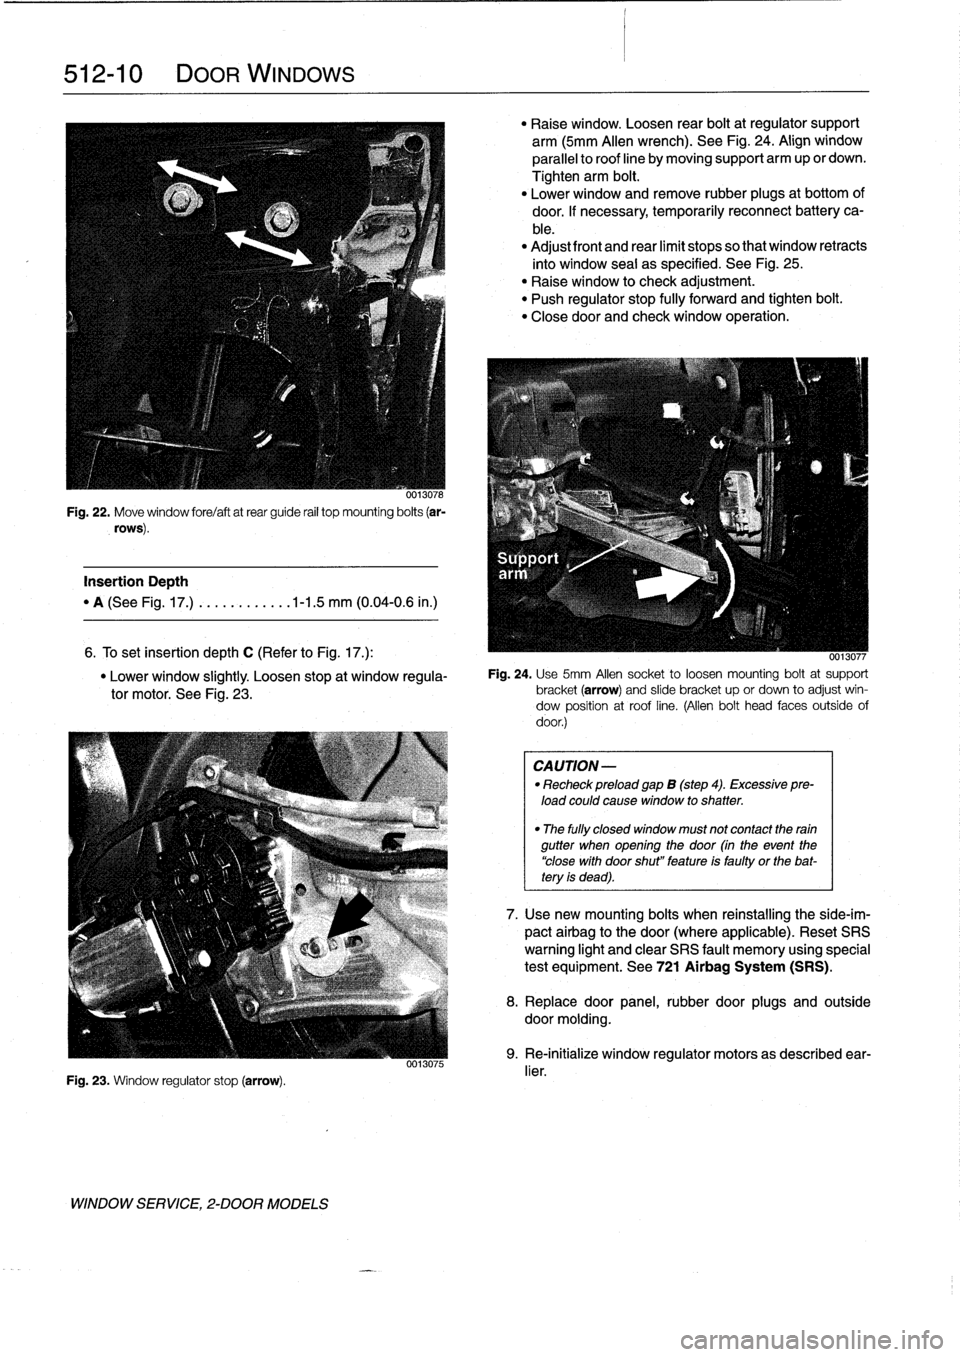 BMW 318i 1998 E36 Workshop Manual 
512-
1
0

	

DOOR
WINDOWS

0013078

Fig
.
22
.
Move
window
fore/aftatrear
guide
rail
top
mounting
bolts
(ar-

rows)
.

Insertion
Depth

"
A
(See
Fig
.
17
.)
.
..........
.1-1
.5
mm
(0
.04-0
.6
in
.)
